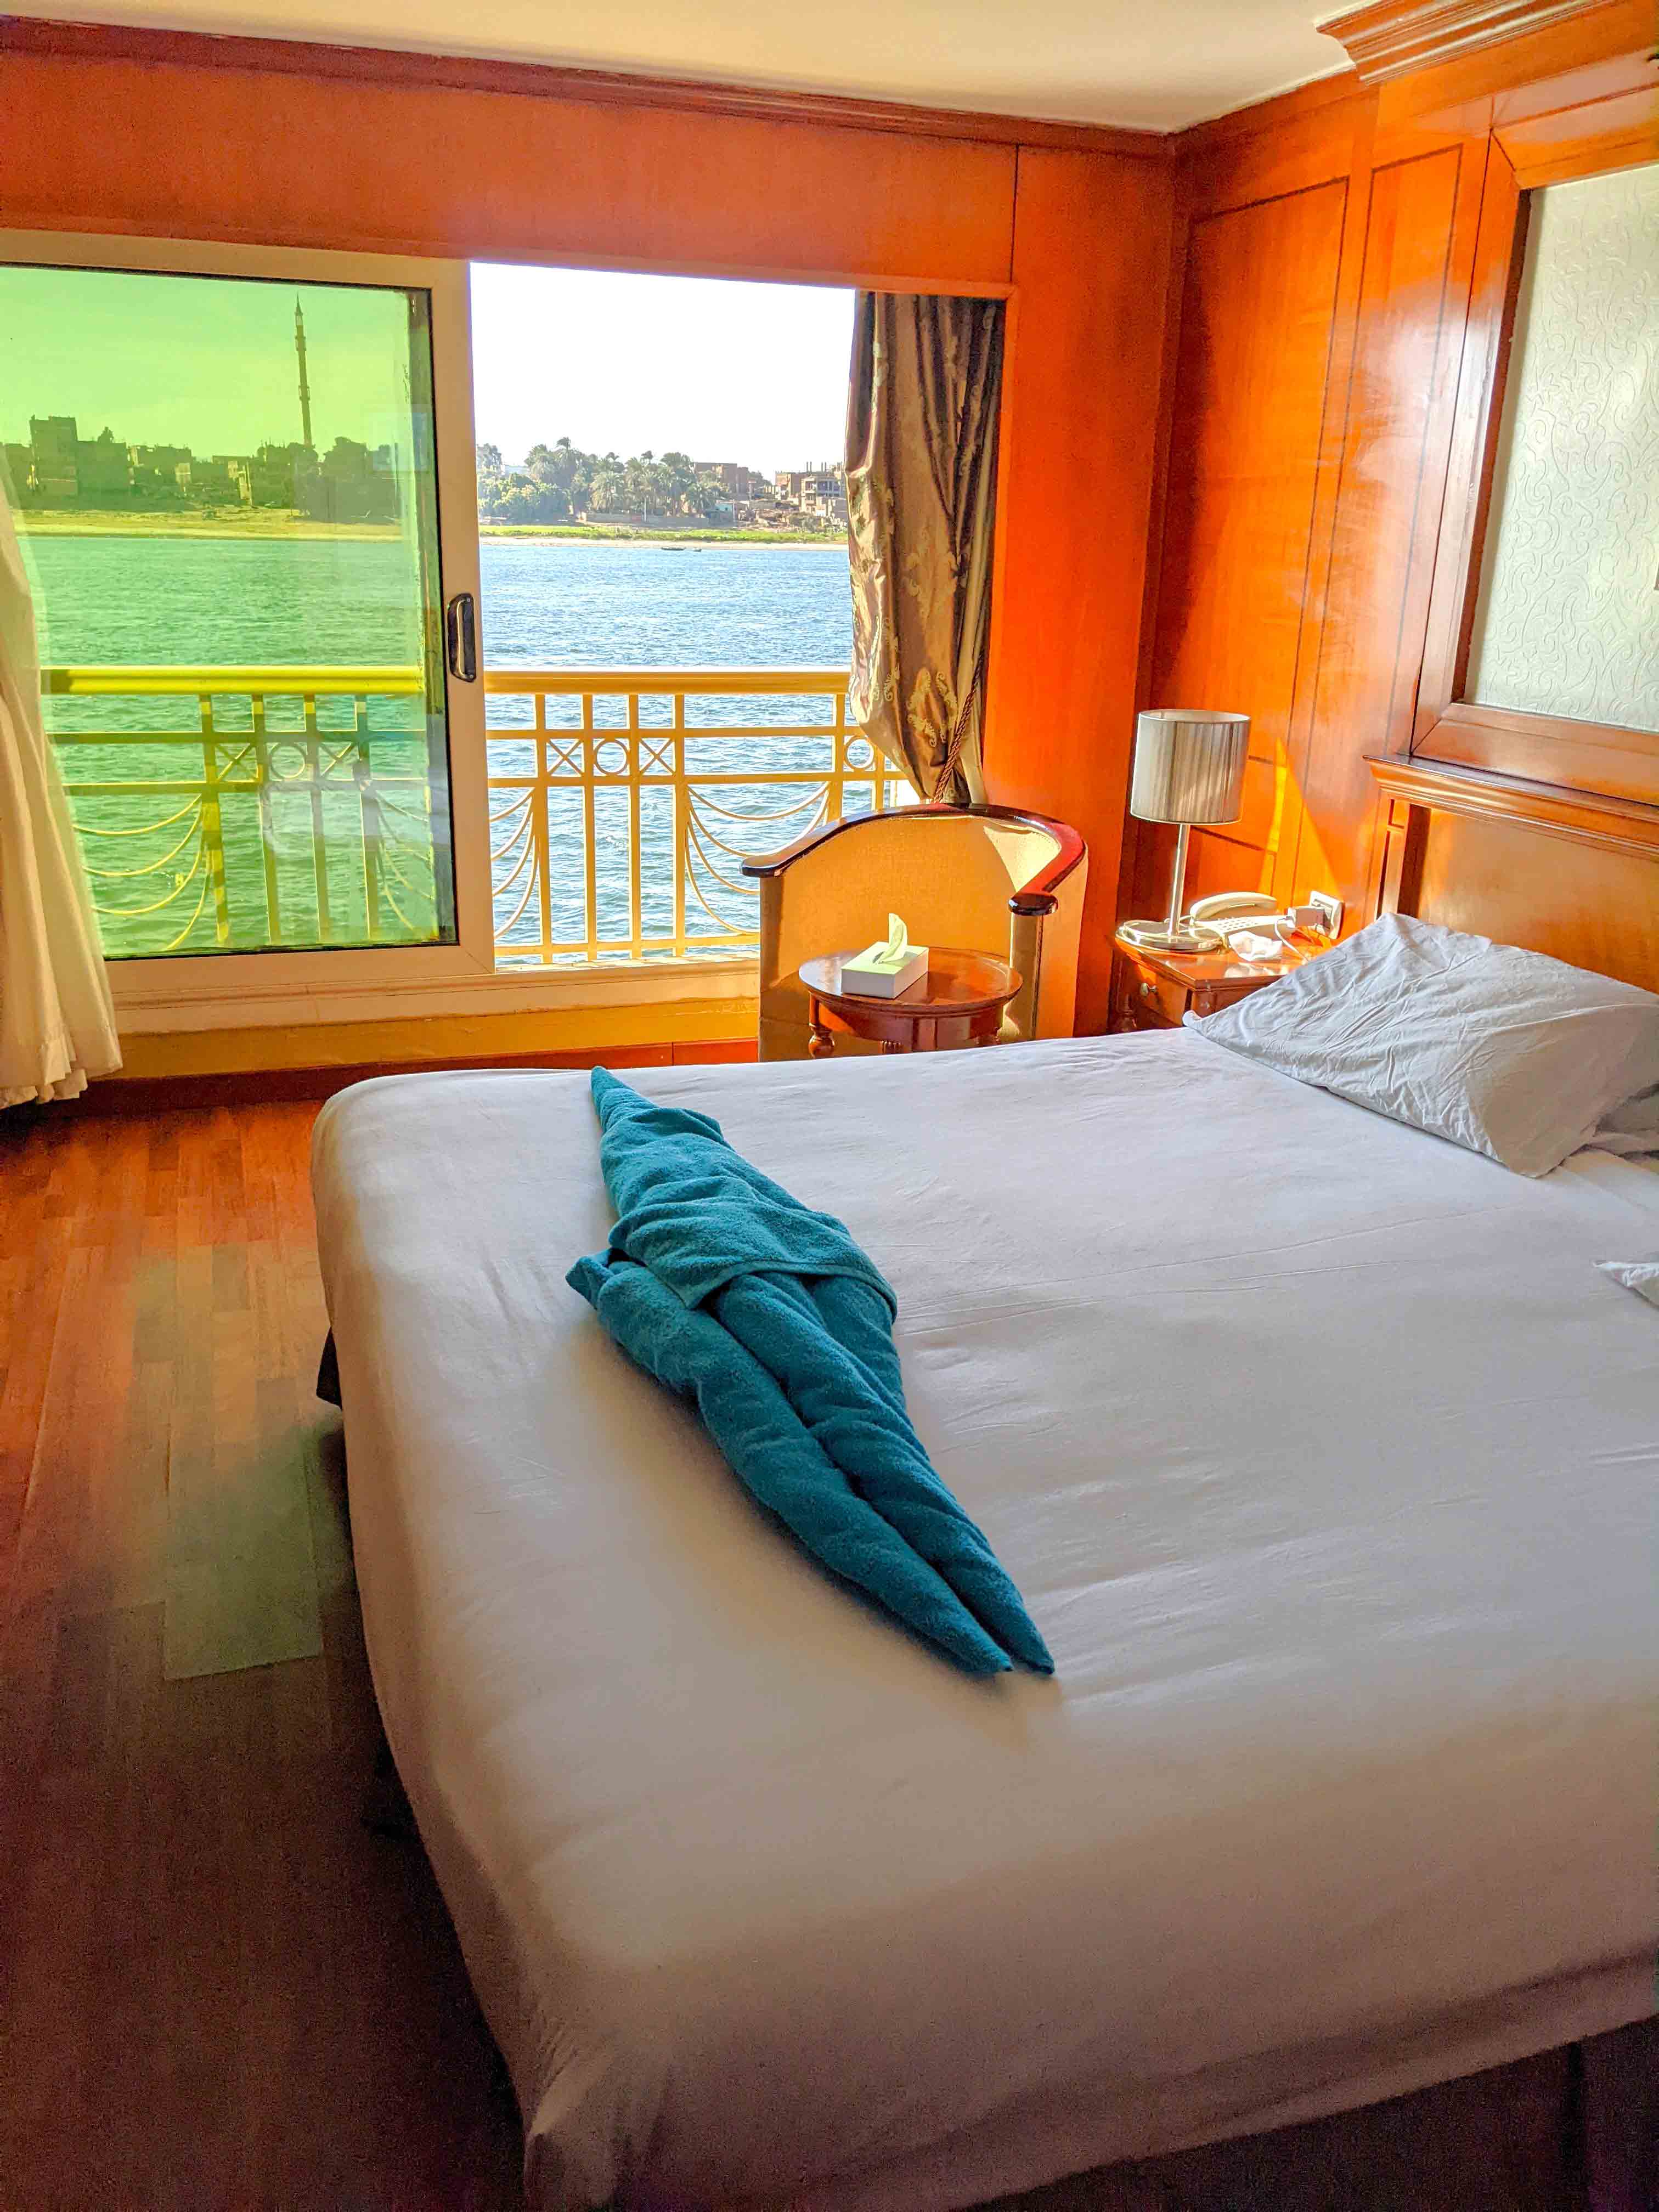 River bank scenery streams by through the window of a berth on a Nile cruise ship